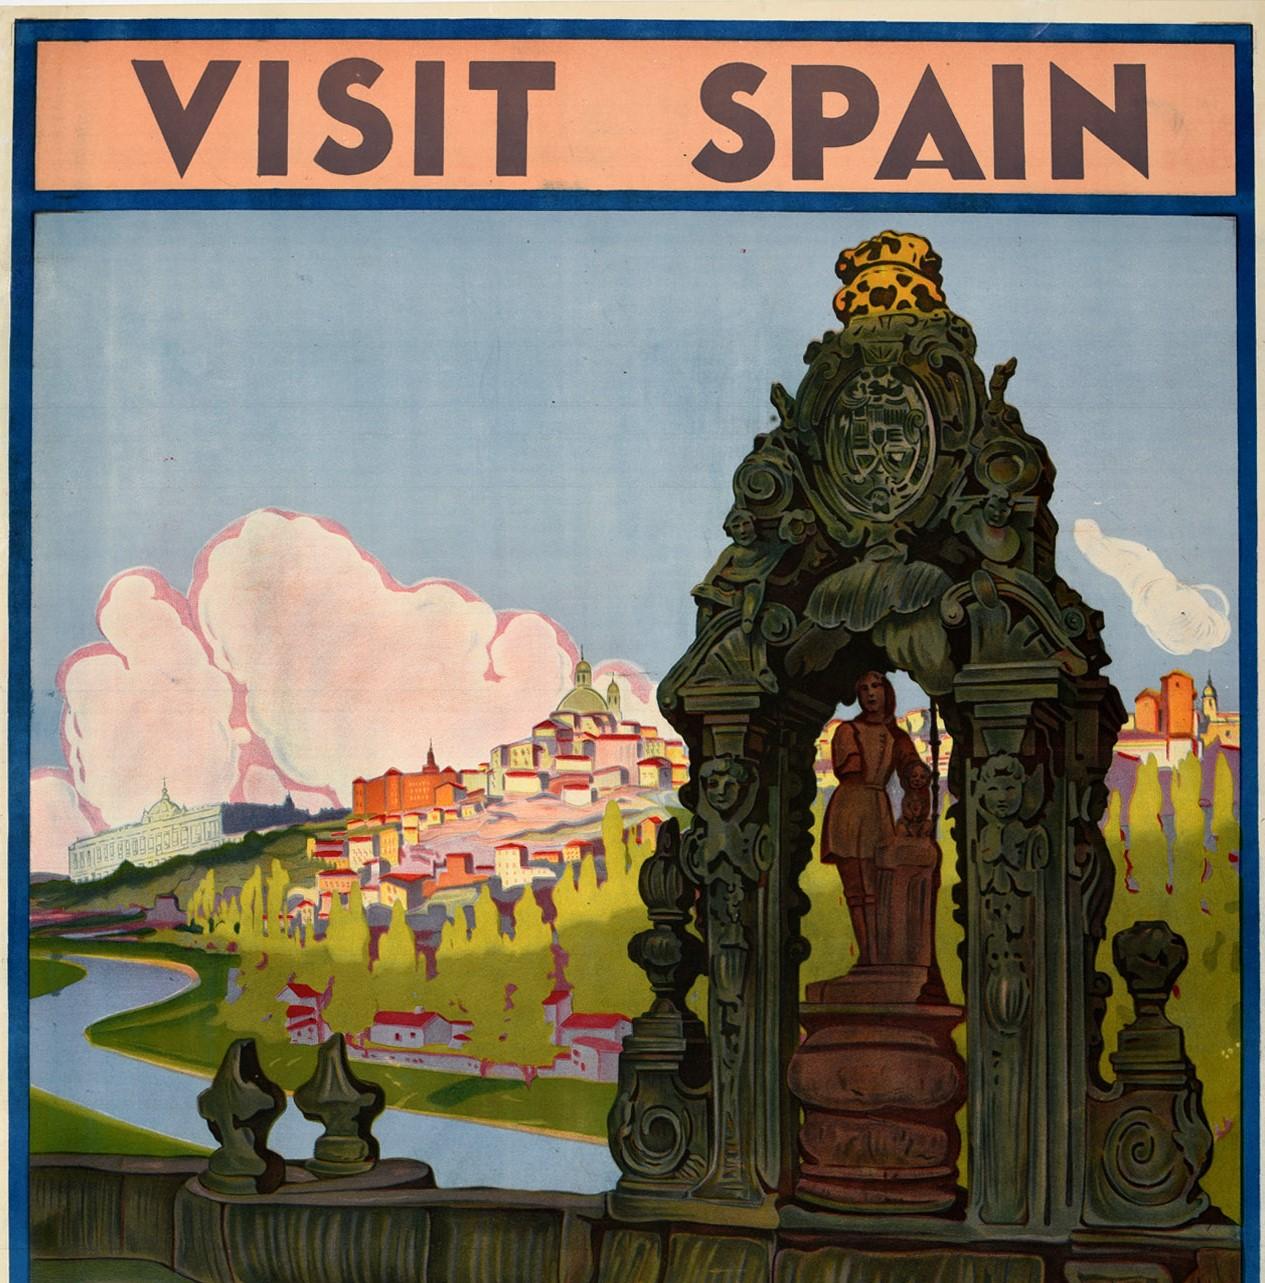 Original vintage travel poster - Visit Spain Madrid The Centre of Spain and Court of its Kings - featuring a stunning design of the historic San Isidro sculpture on the Toledo Bridge with a scenic view along the river towards trees and the city on